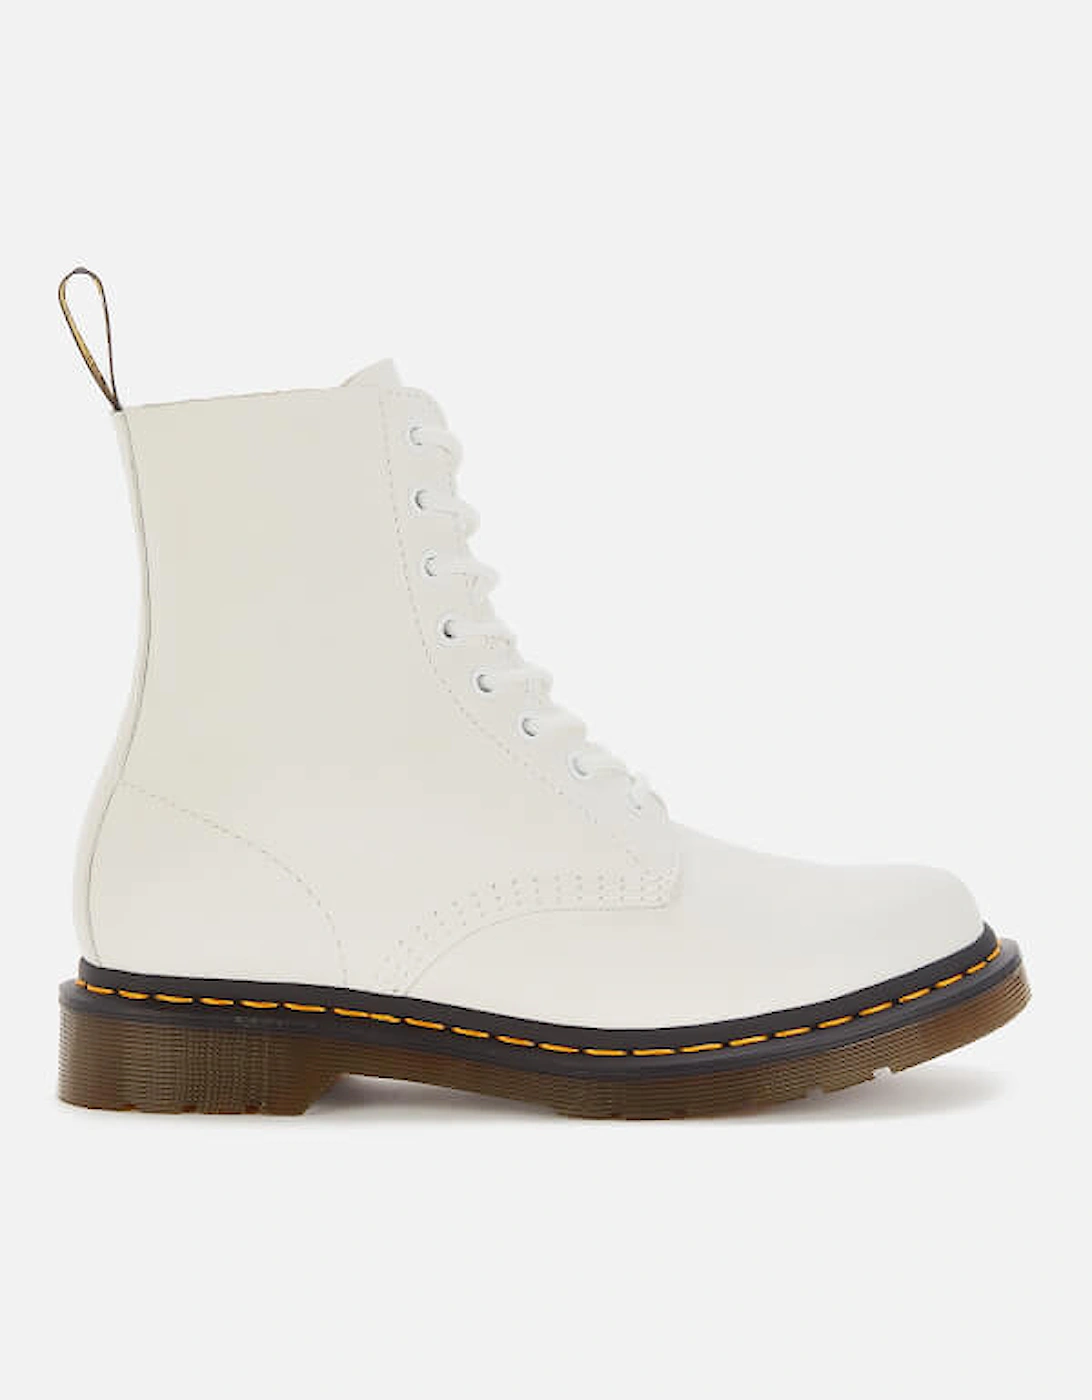 Dr. Martens Women's 1460 Pascal Virginia Leather 8-Eye Boots - Optical White - Dr. Martens - Home - Designer Brands A-Z - Dr. Martens - Dr. Martens Women's 1460 Pascal Virginia Leather 8-Eye Boots - Optical White, 3 of 2